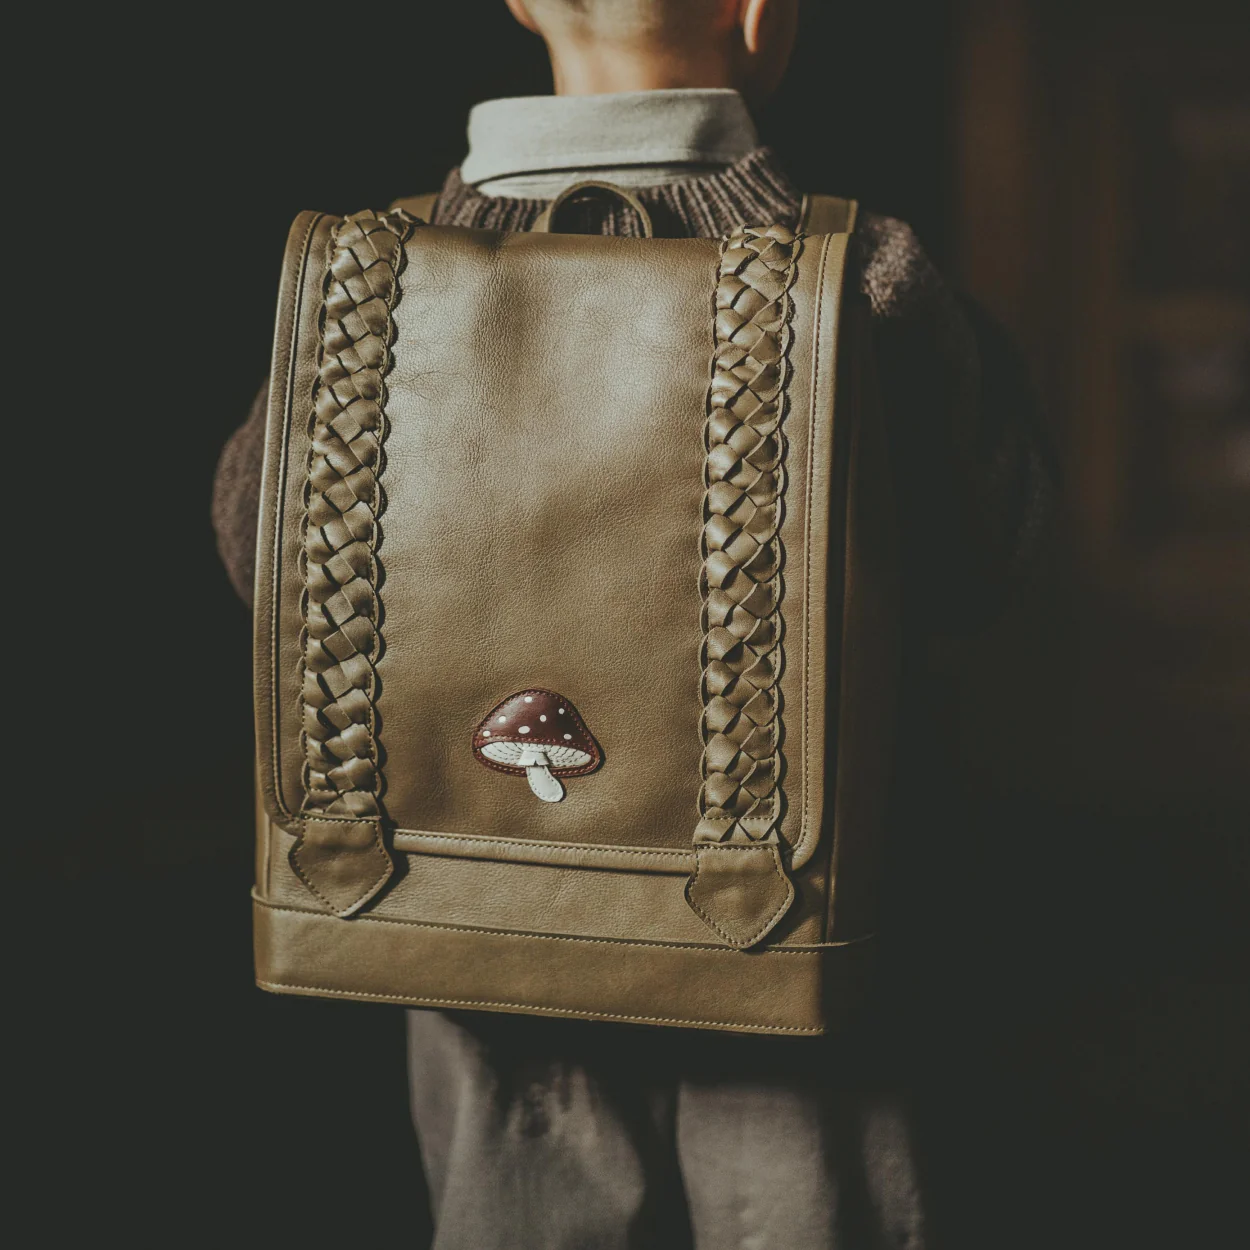 Hikey School Bag | Toadstool Army Leather